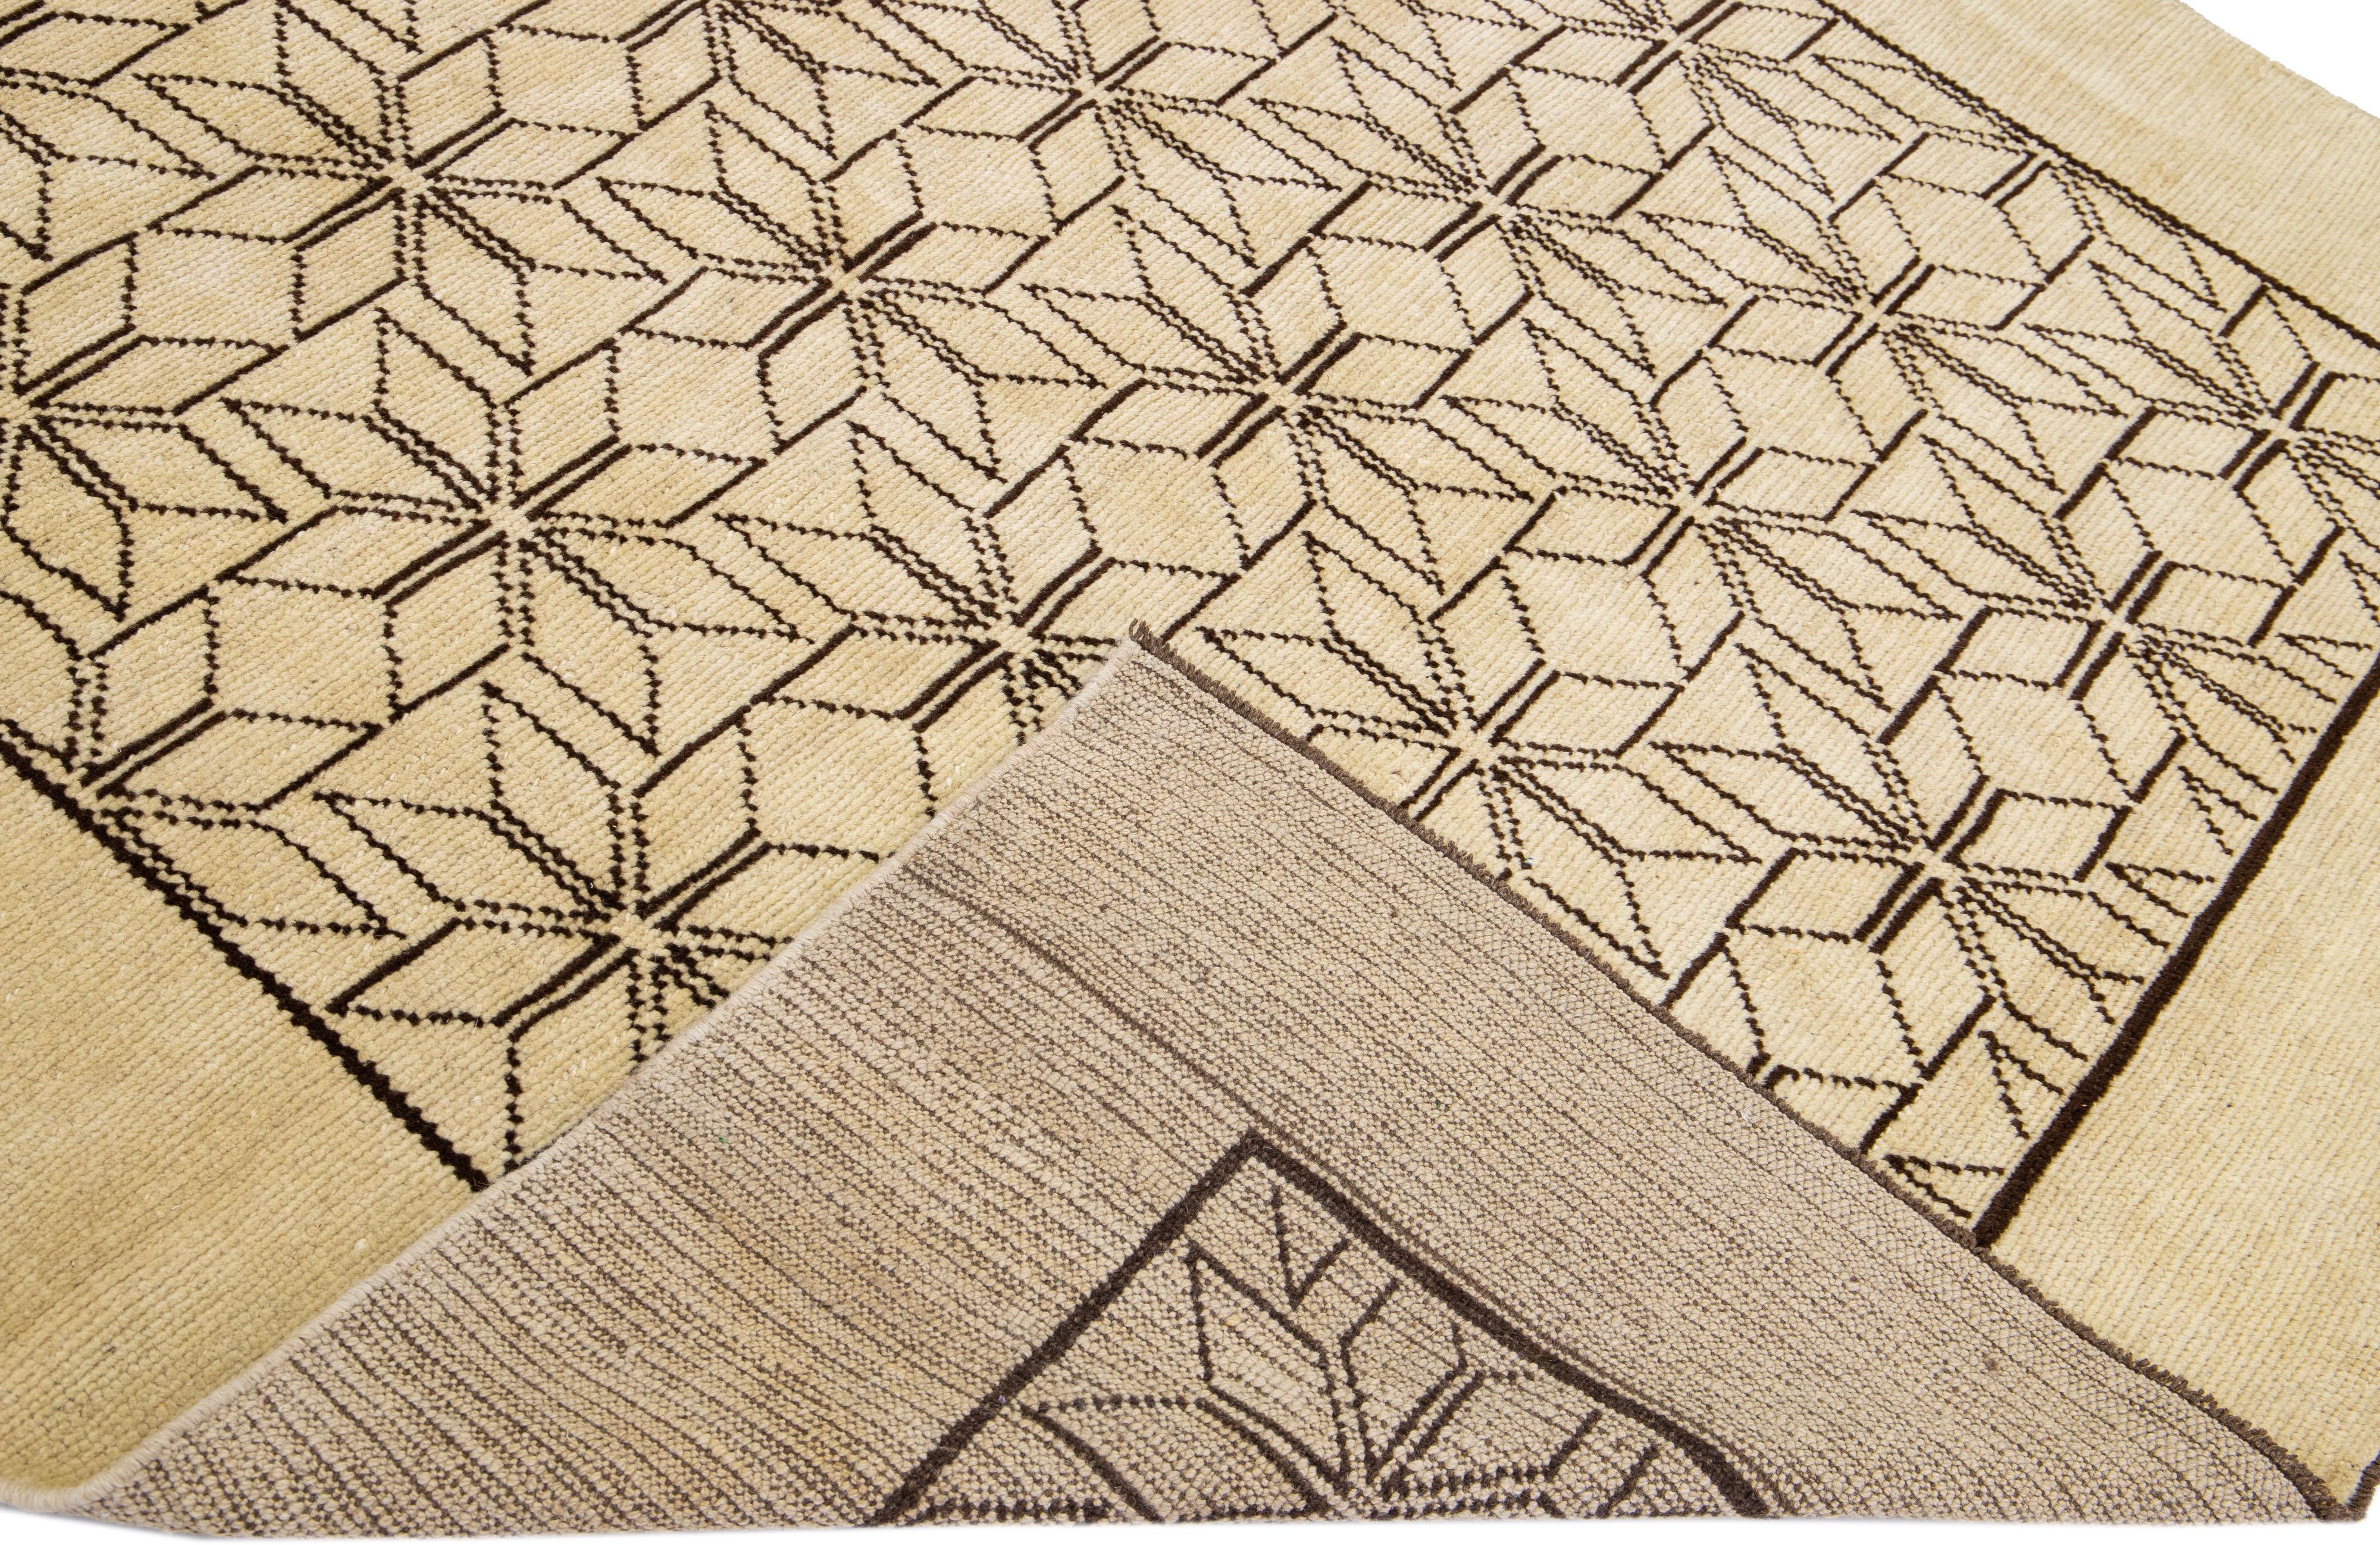 This Beautiful Moroccan-style handmade wool rug makes part of our Northwest collection and features a beige color field and dark brown accents in a gorgeous geometric tribal pattern design.

This rug measures: 6'9